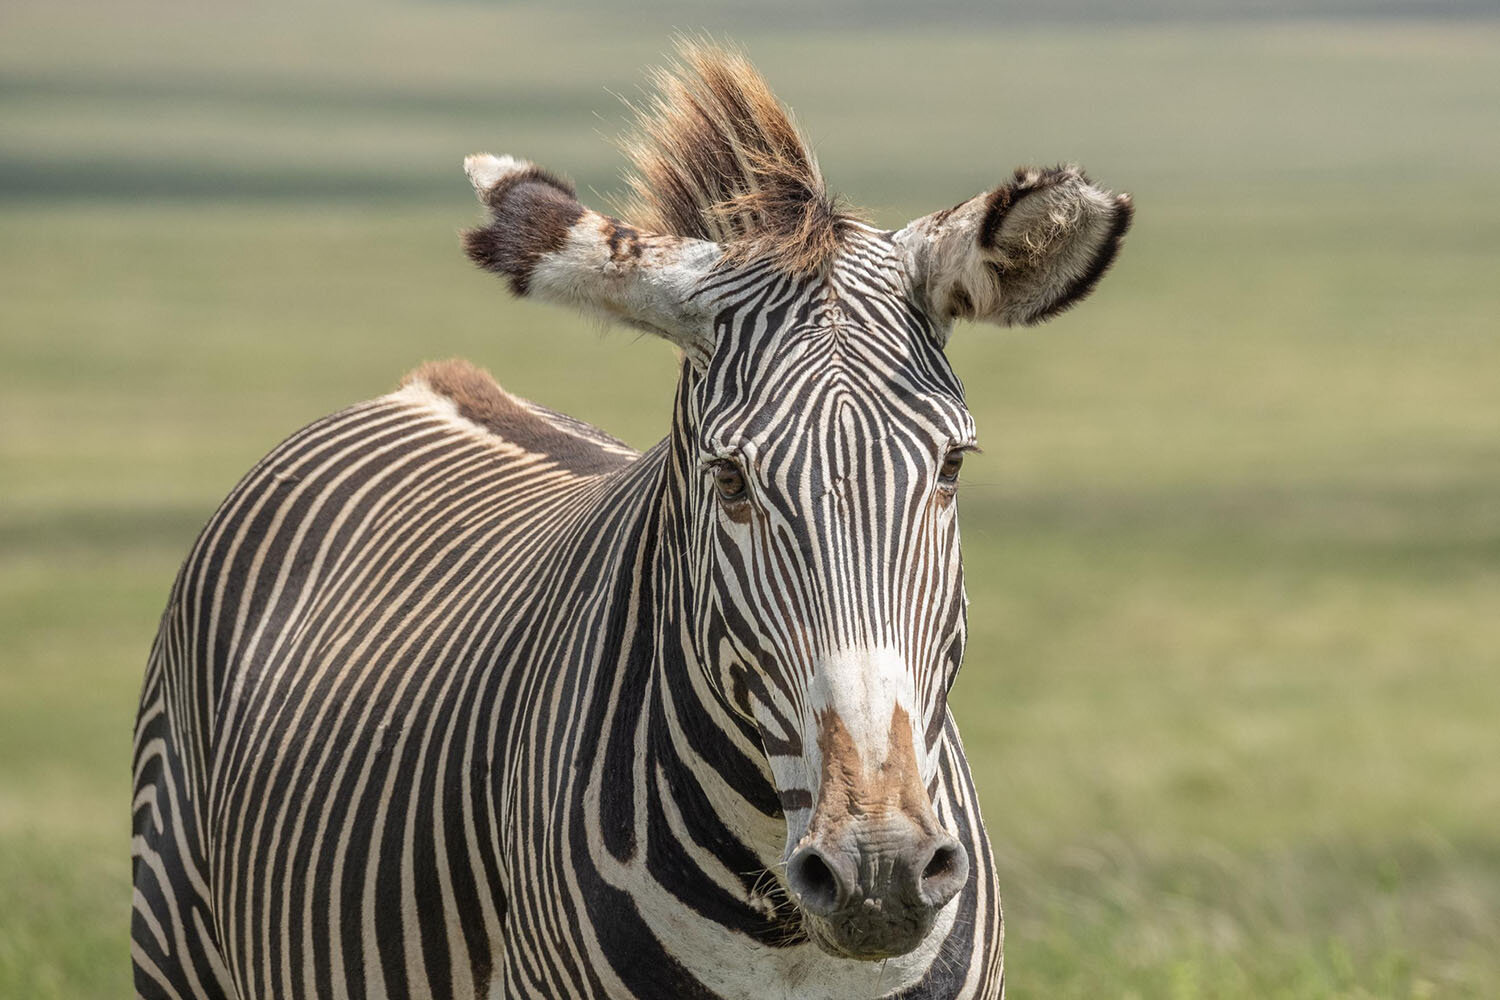 Zebras – Black and White or White and Black? — Kathy Karn Photography